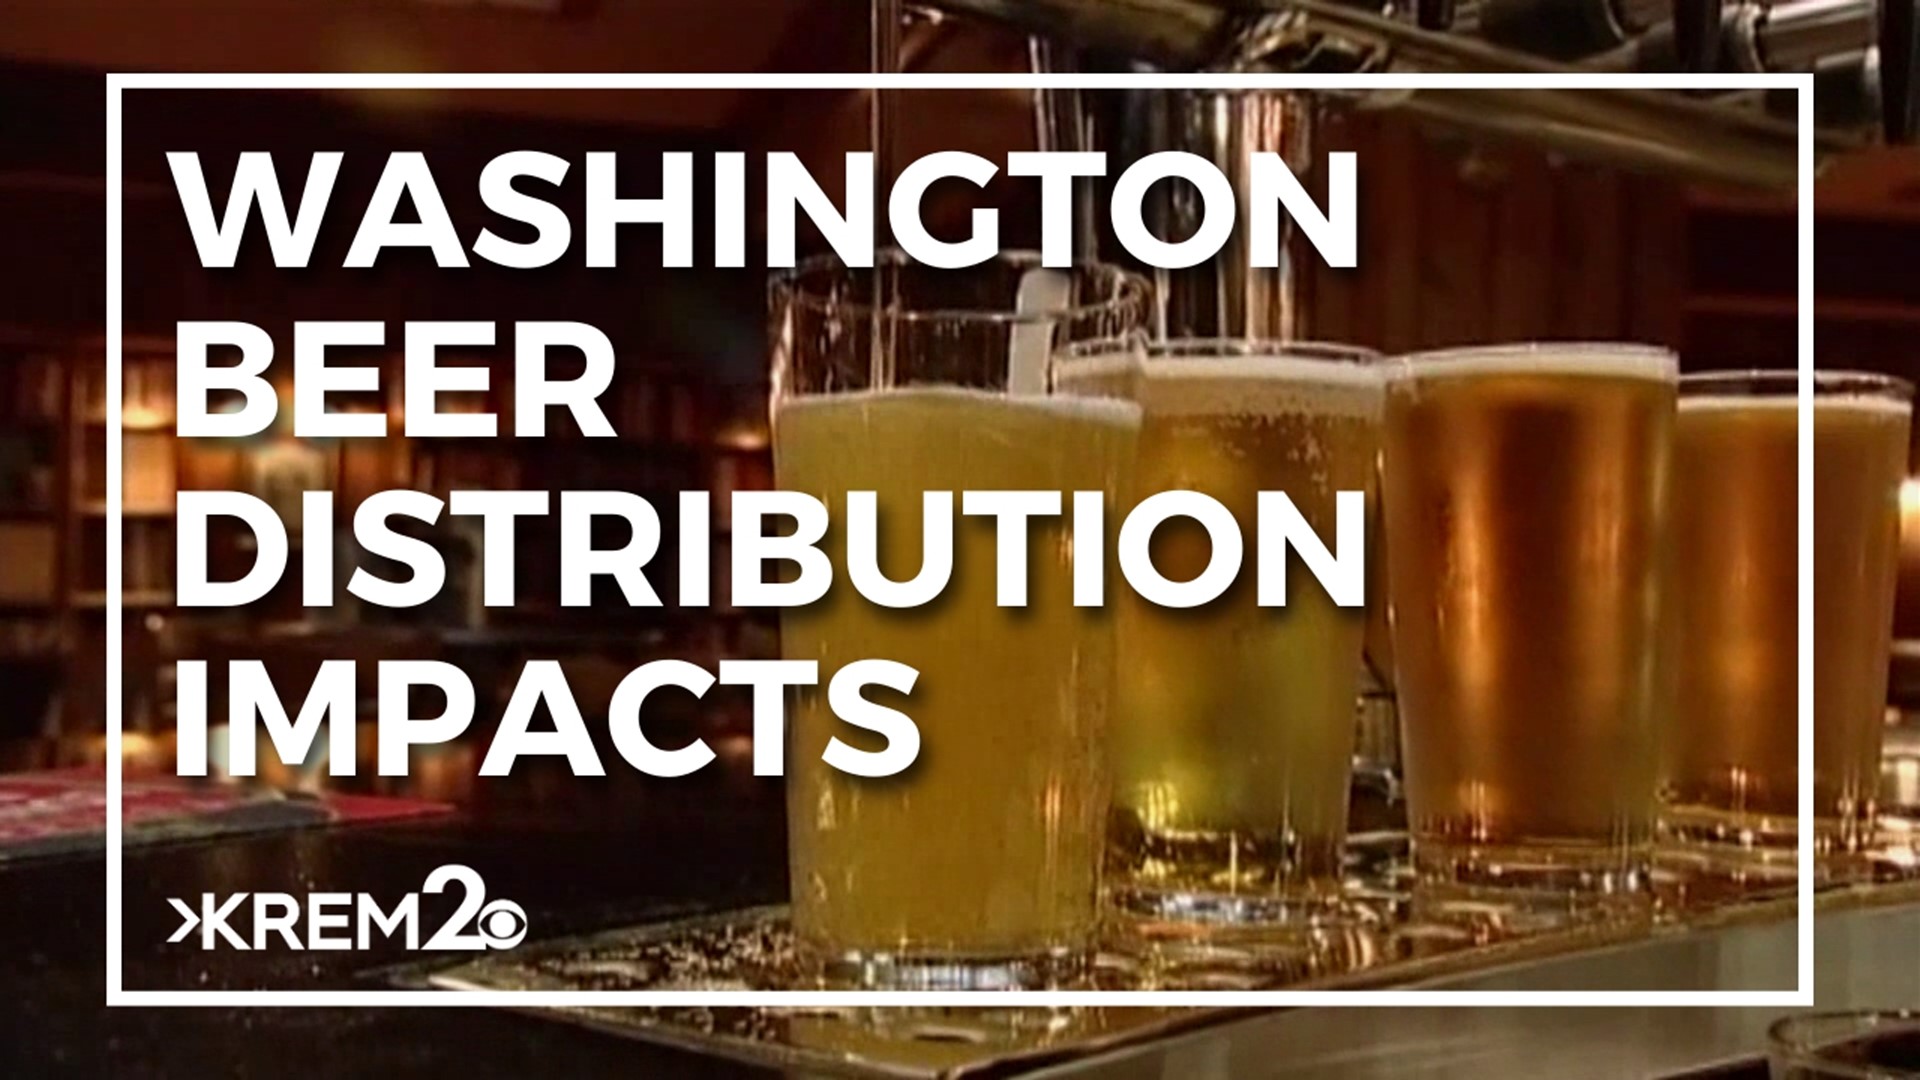 Pepsi Co.'s purchase of Corwin Beverage is a major blow to small craft brewers in Washington.